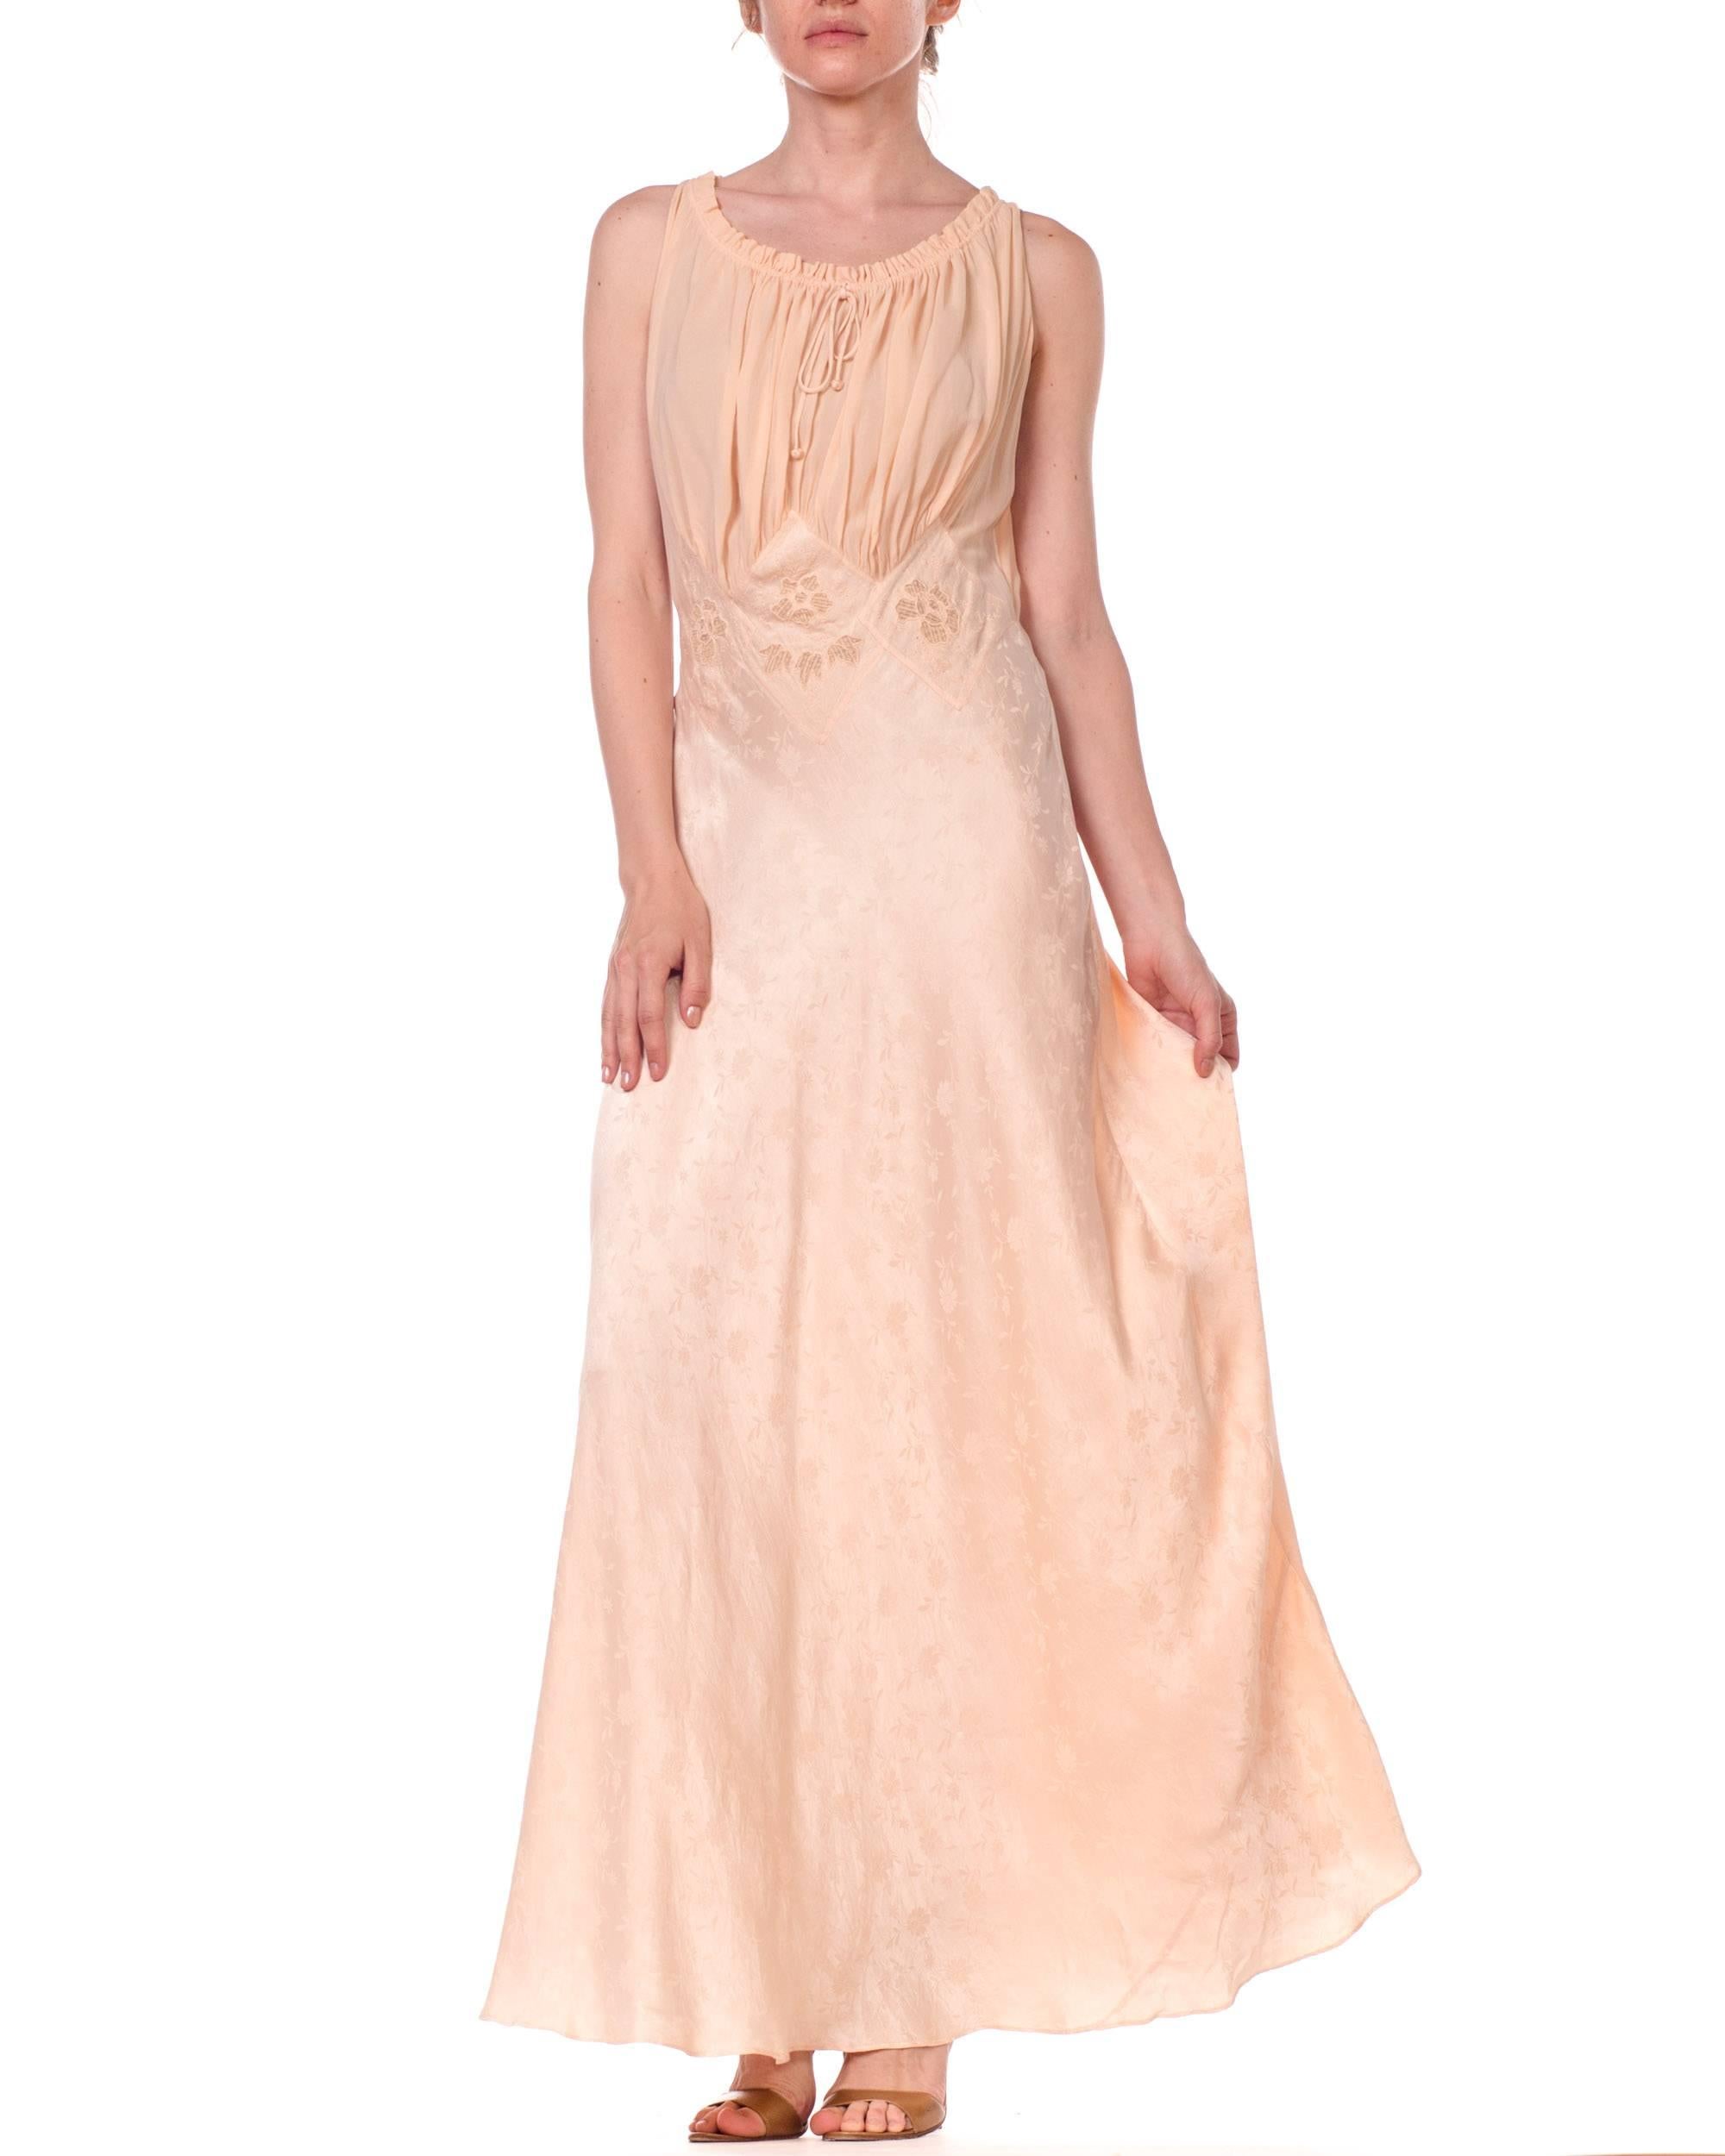 1930s Bias Cut Silk Negligee with Sheer Chiffon & Hand Embroidery 7